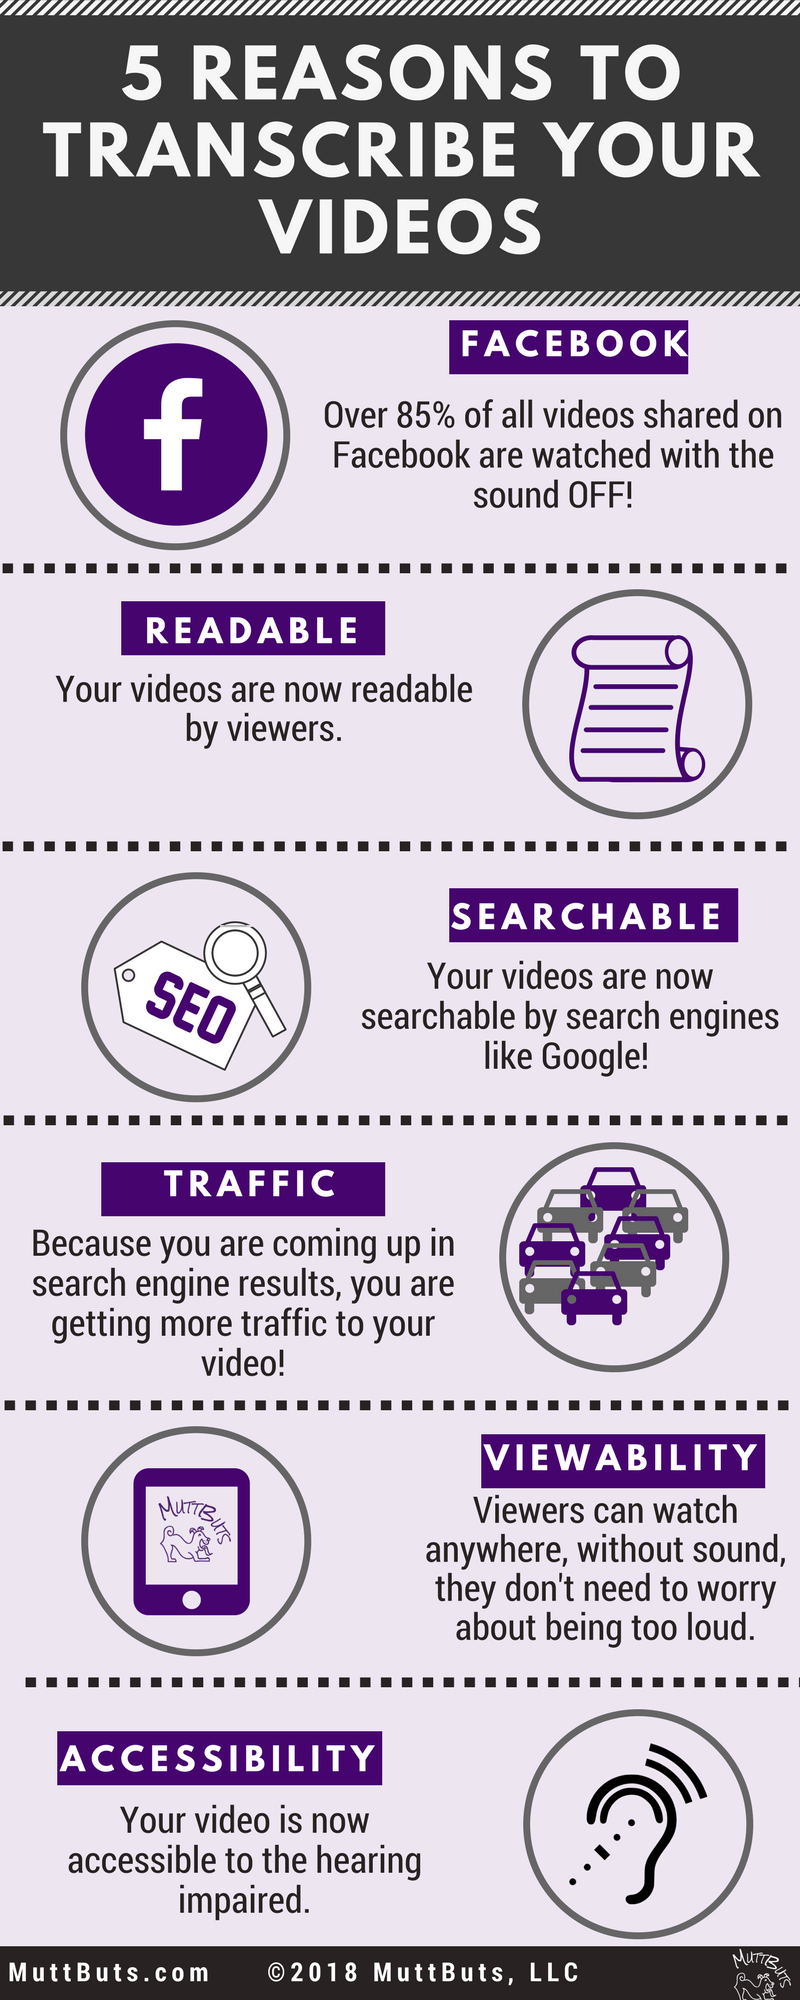 Infographic 5 Reasons to Transcribe Your Videos 